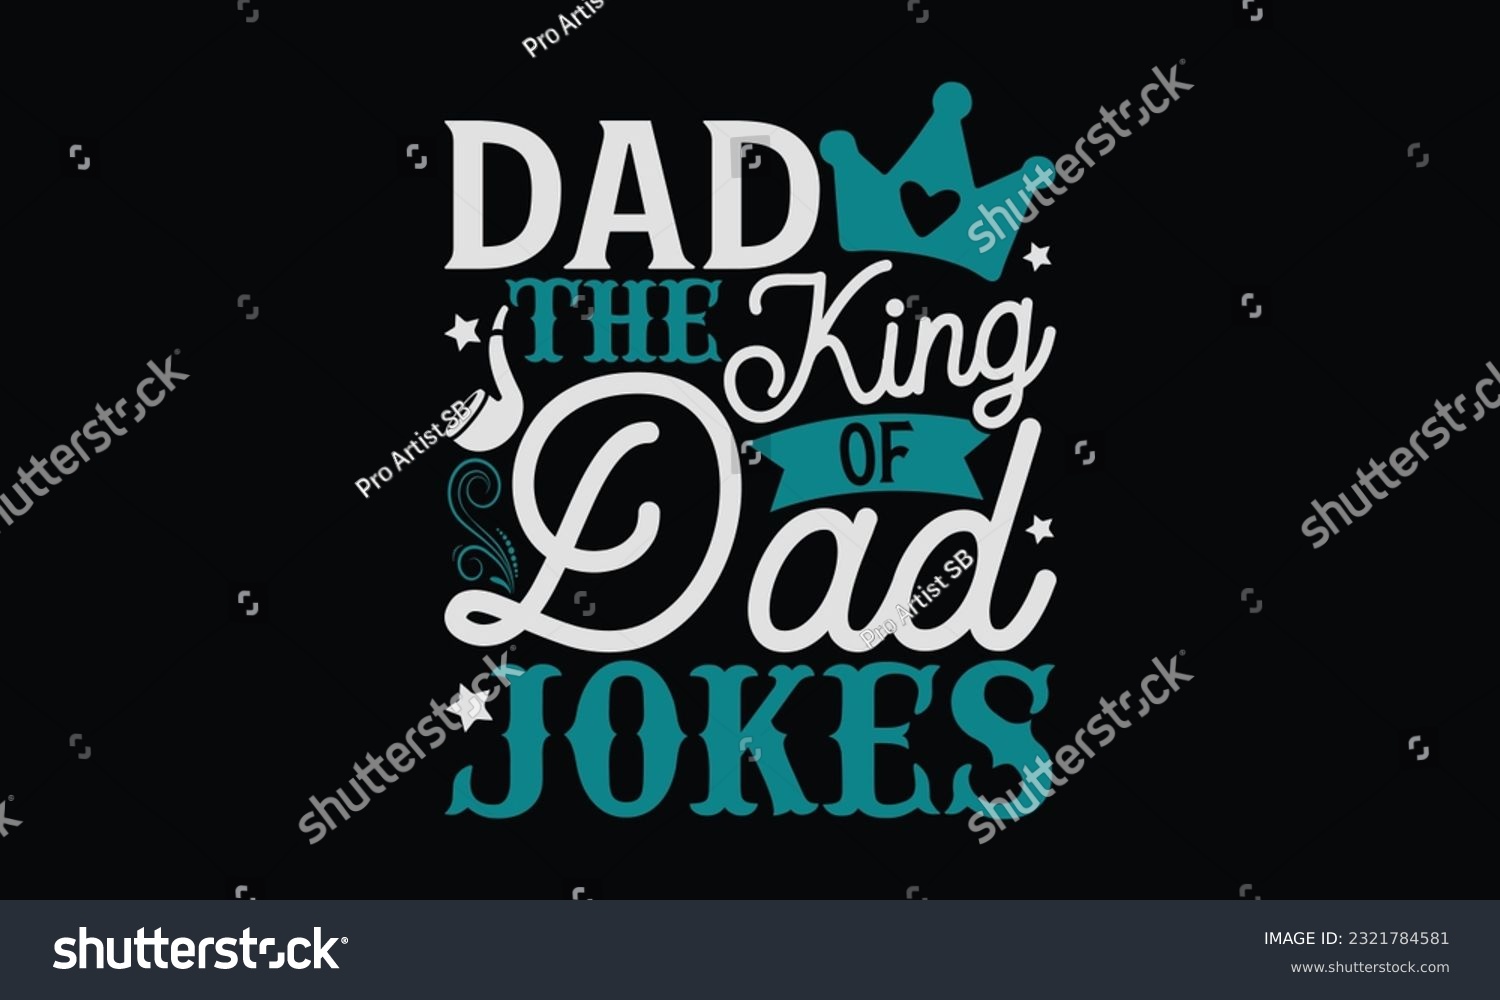 SVG of Dad The King Of Dad Jokes - Father's Day T-Shirt Design, Print On Design For T-Shirts, Sweater, Jumper, Mug, Sticker, Pillow, Poster Cards And Much More. svg